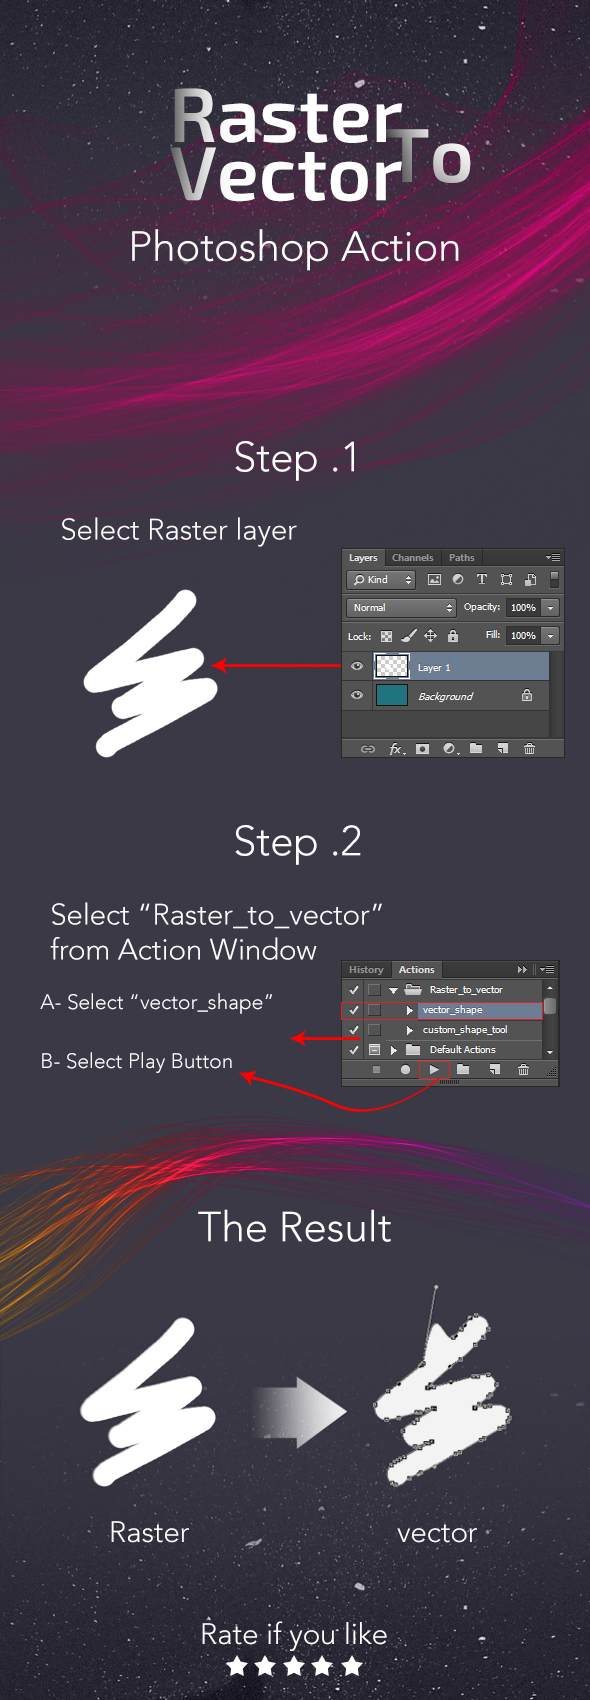 convert raster to vector in photoshop